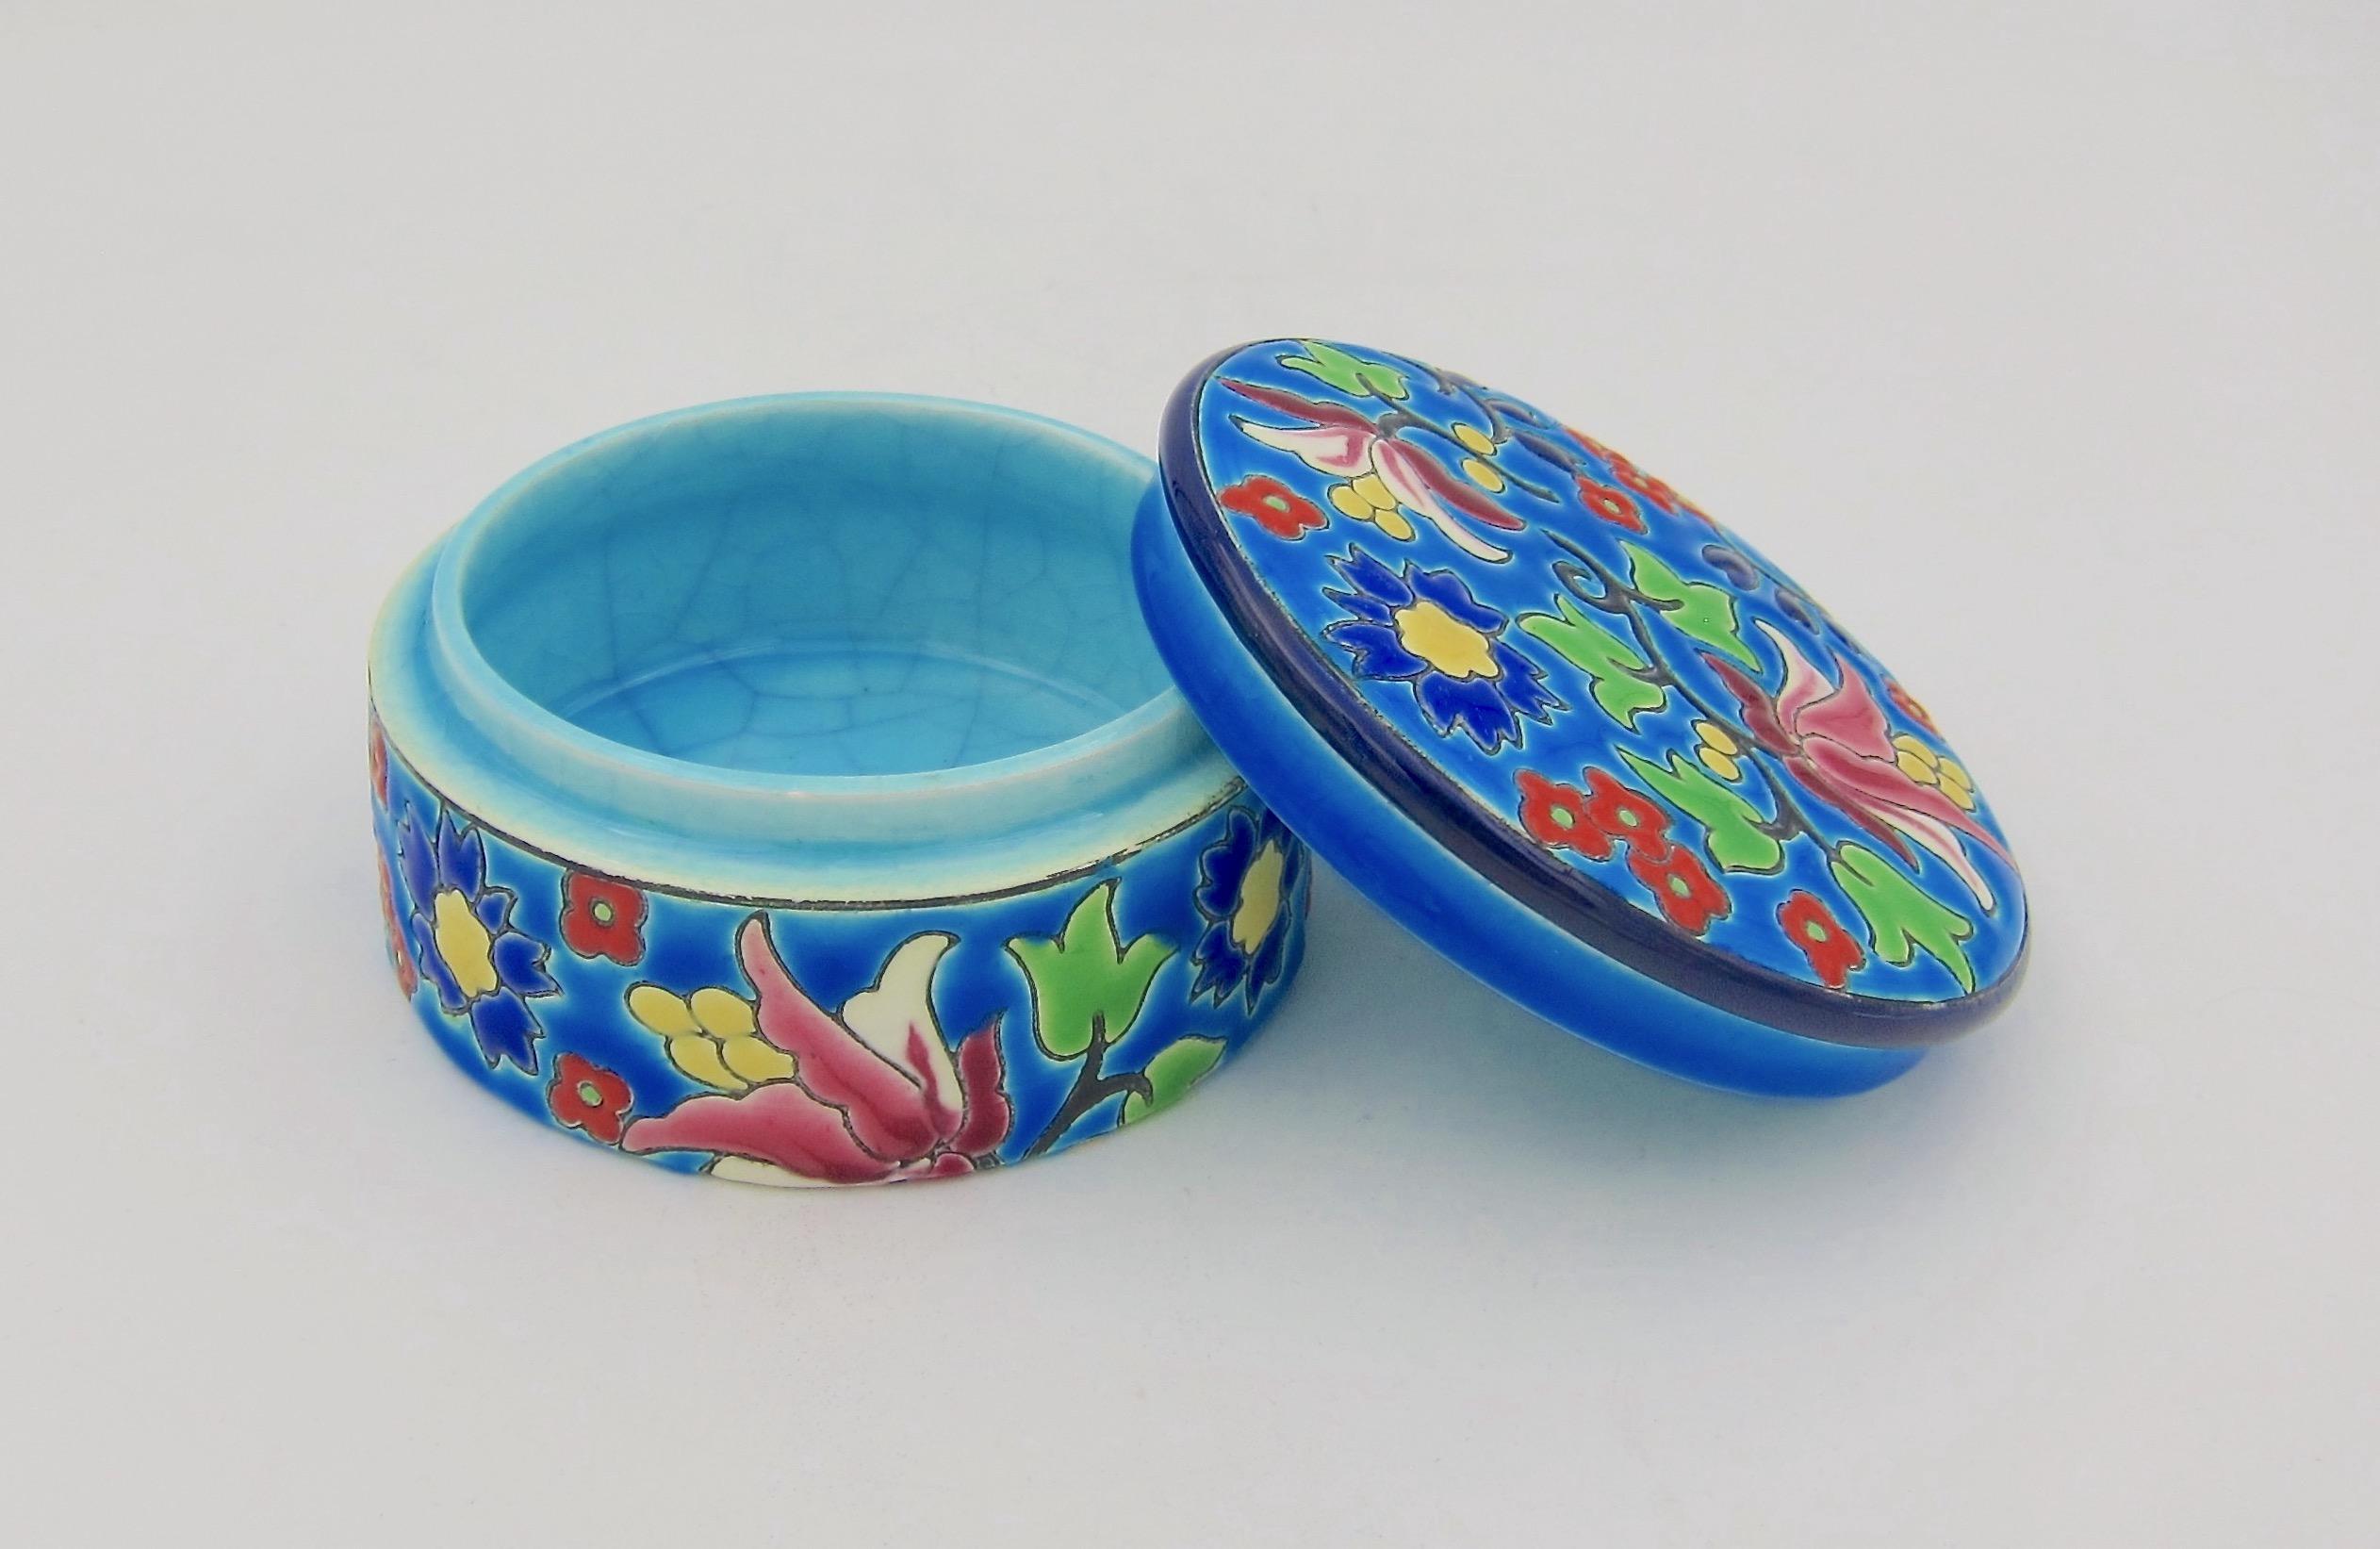 Chinoiserie Vintage French Faience Emaux de Longwy Trinket Box with Craquelure Glaze